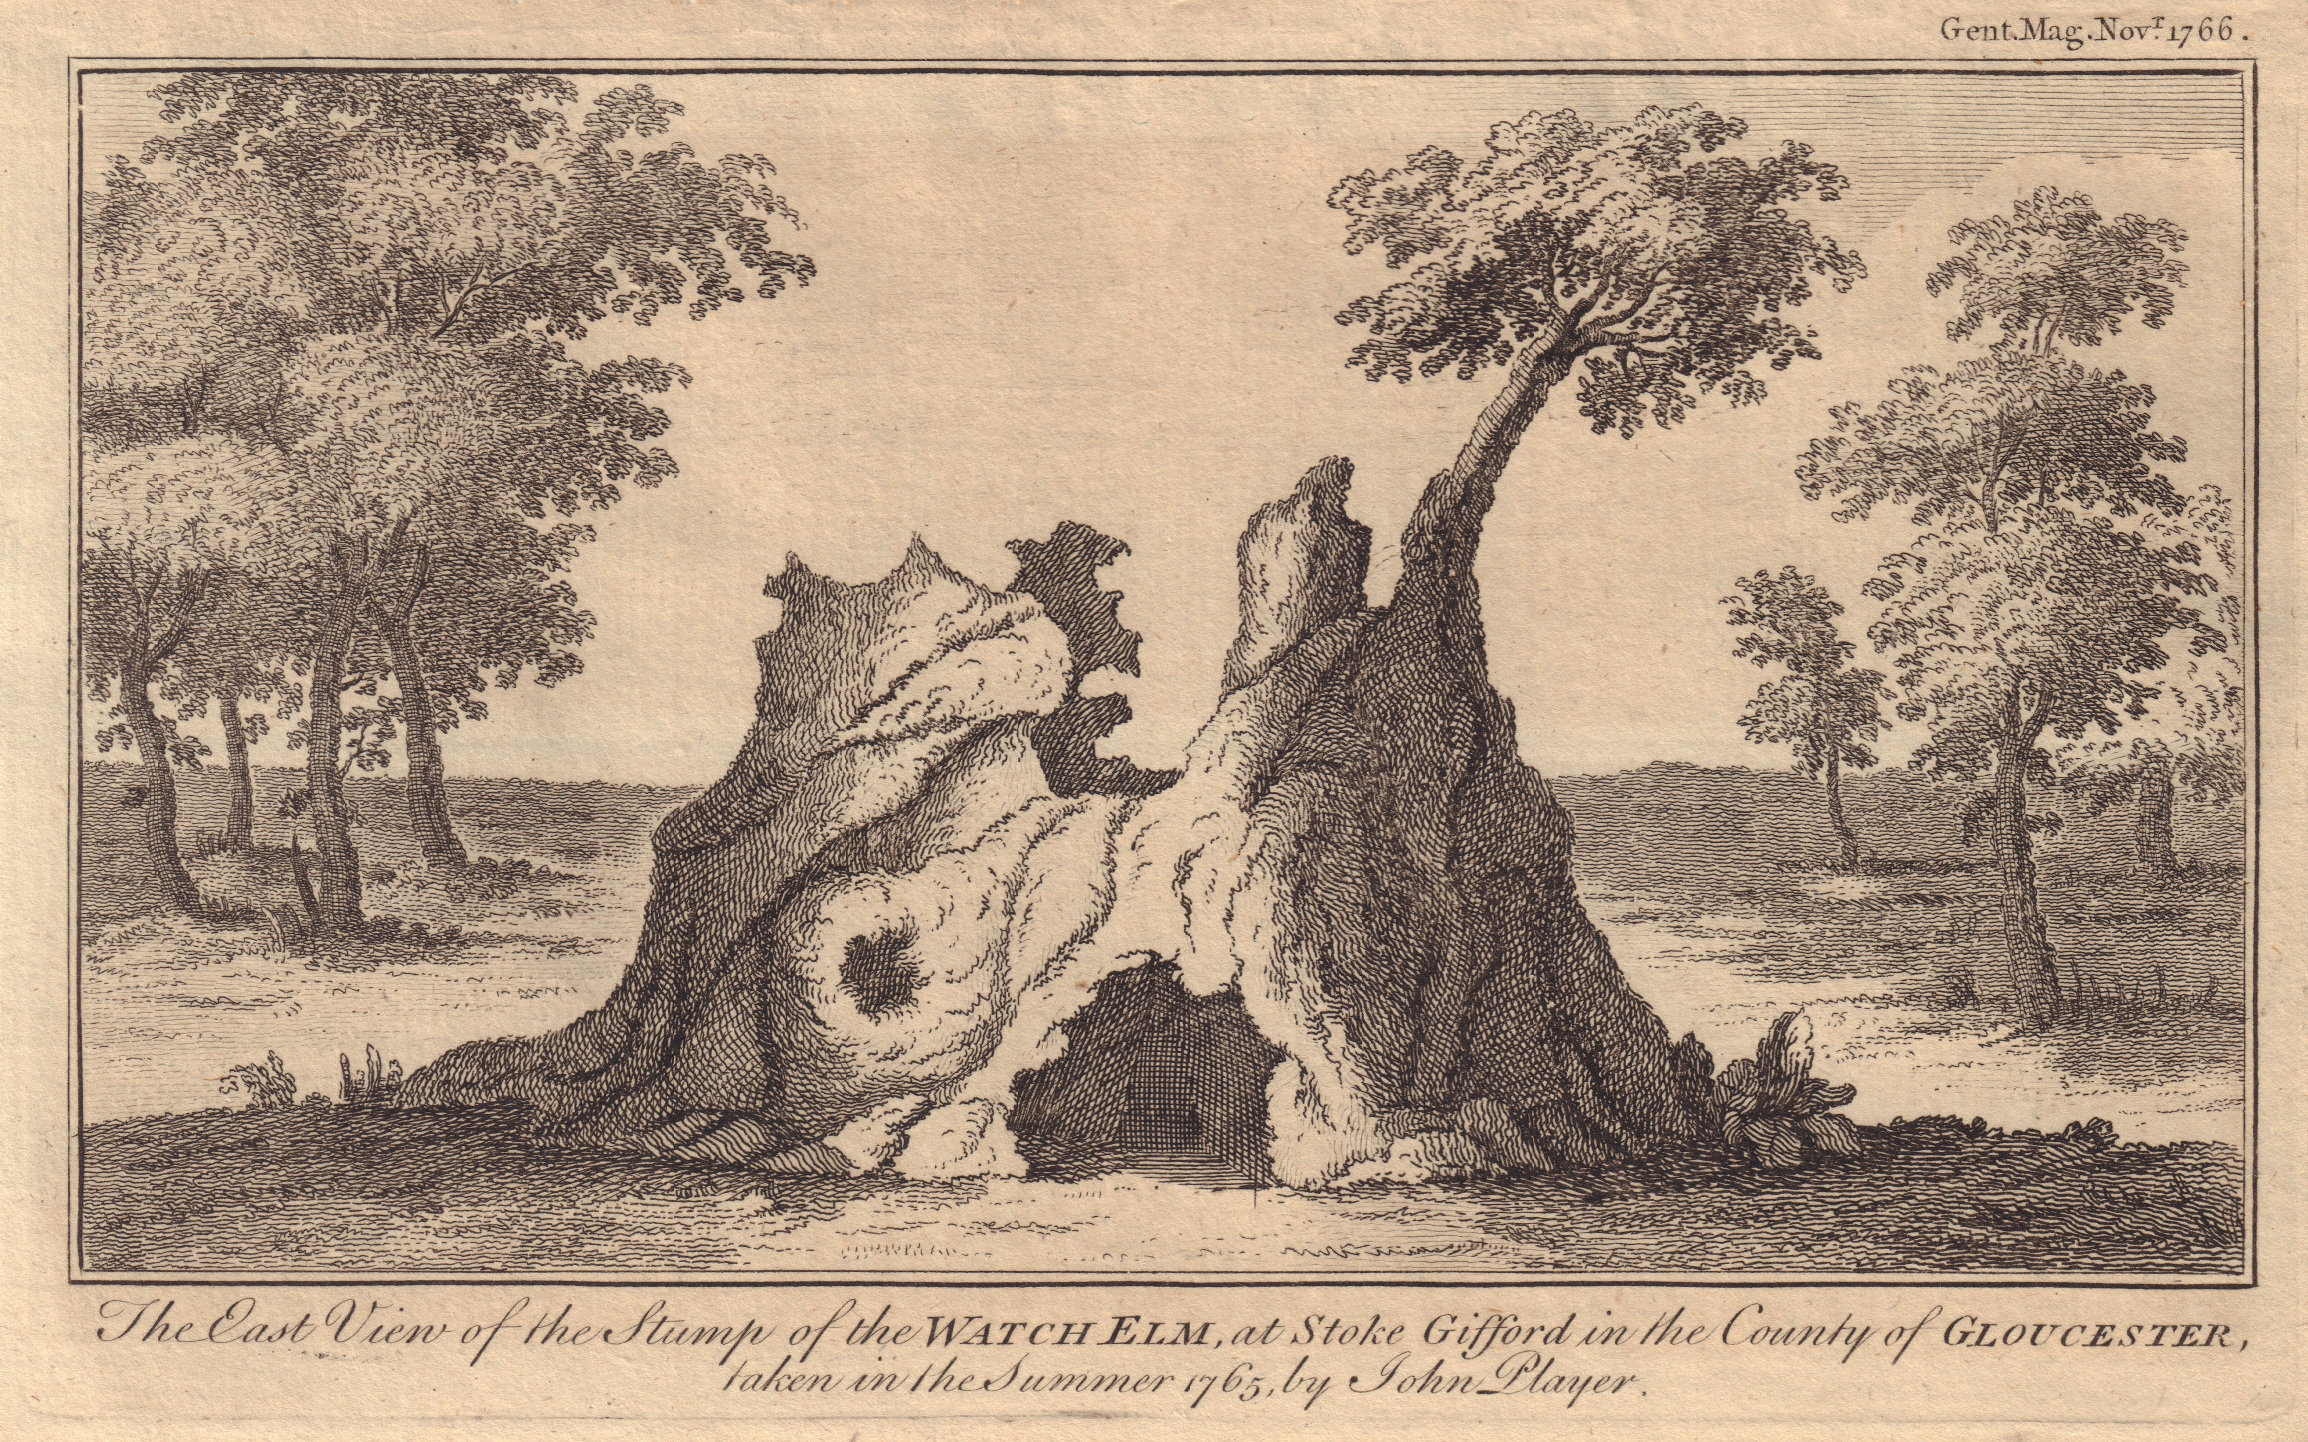 Stump of the Watch Elm Tree, Stoke Gifford, Gloucestershire. GENTS MAG 1766